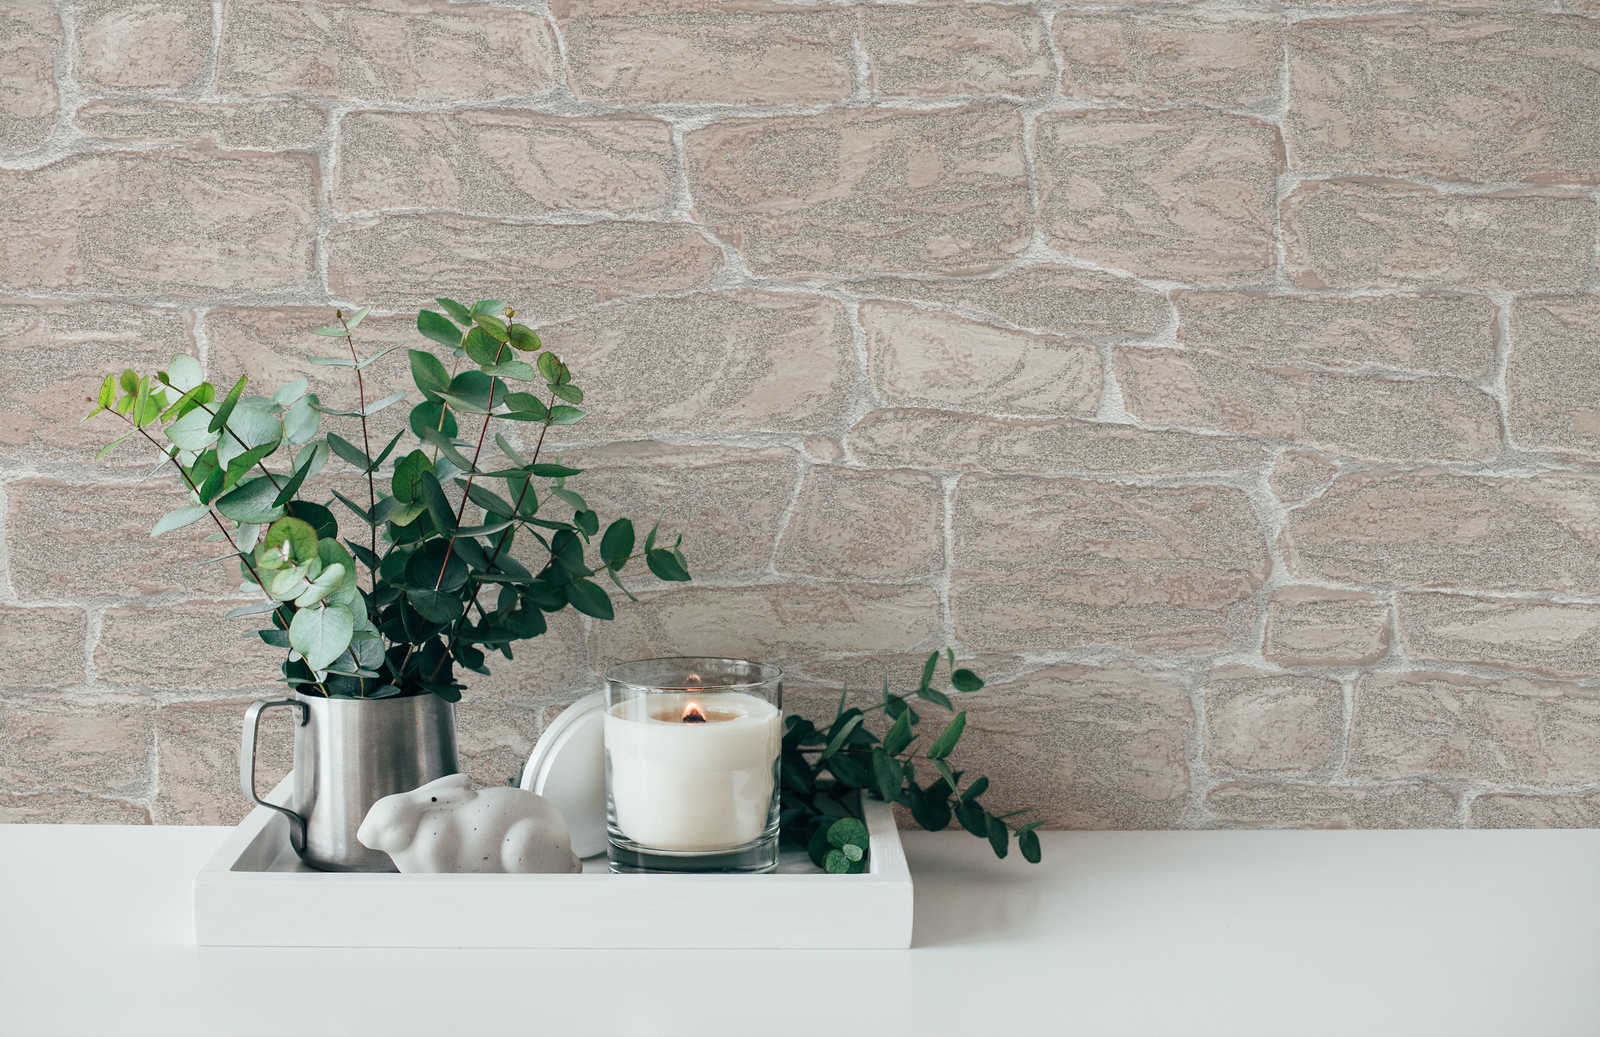             Wallpaper natural stone wall with glitter effect - beige
        